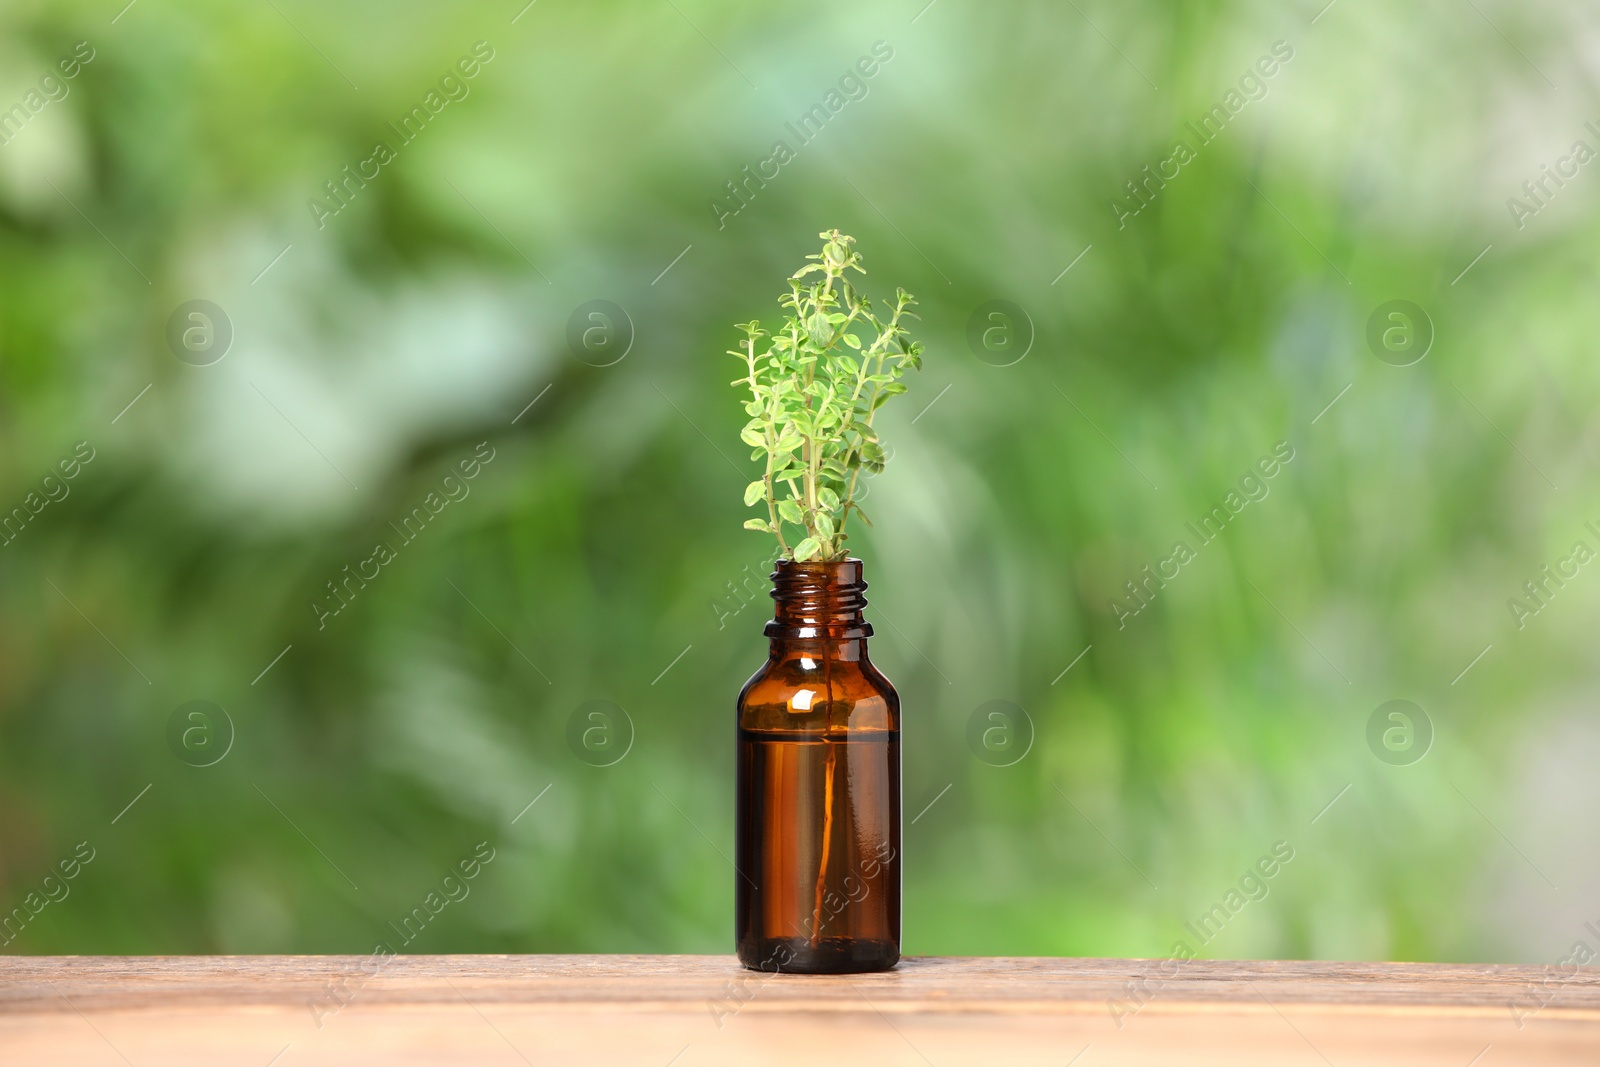 Photo of Bottle with essential oil and thyme on wooden table against blurred green background